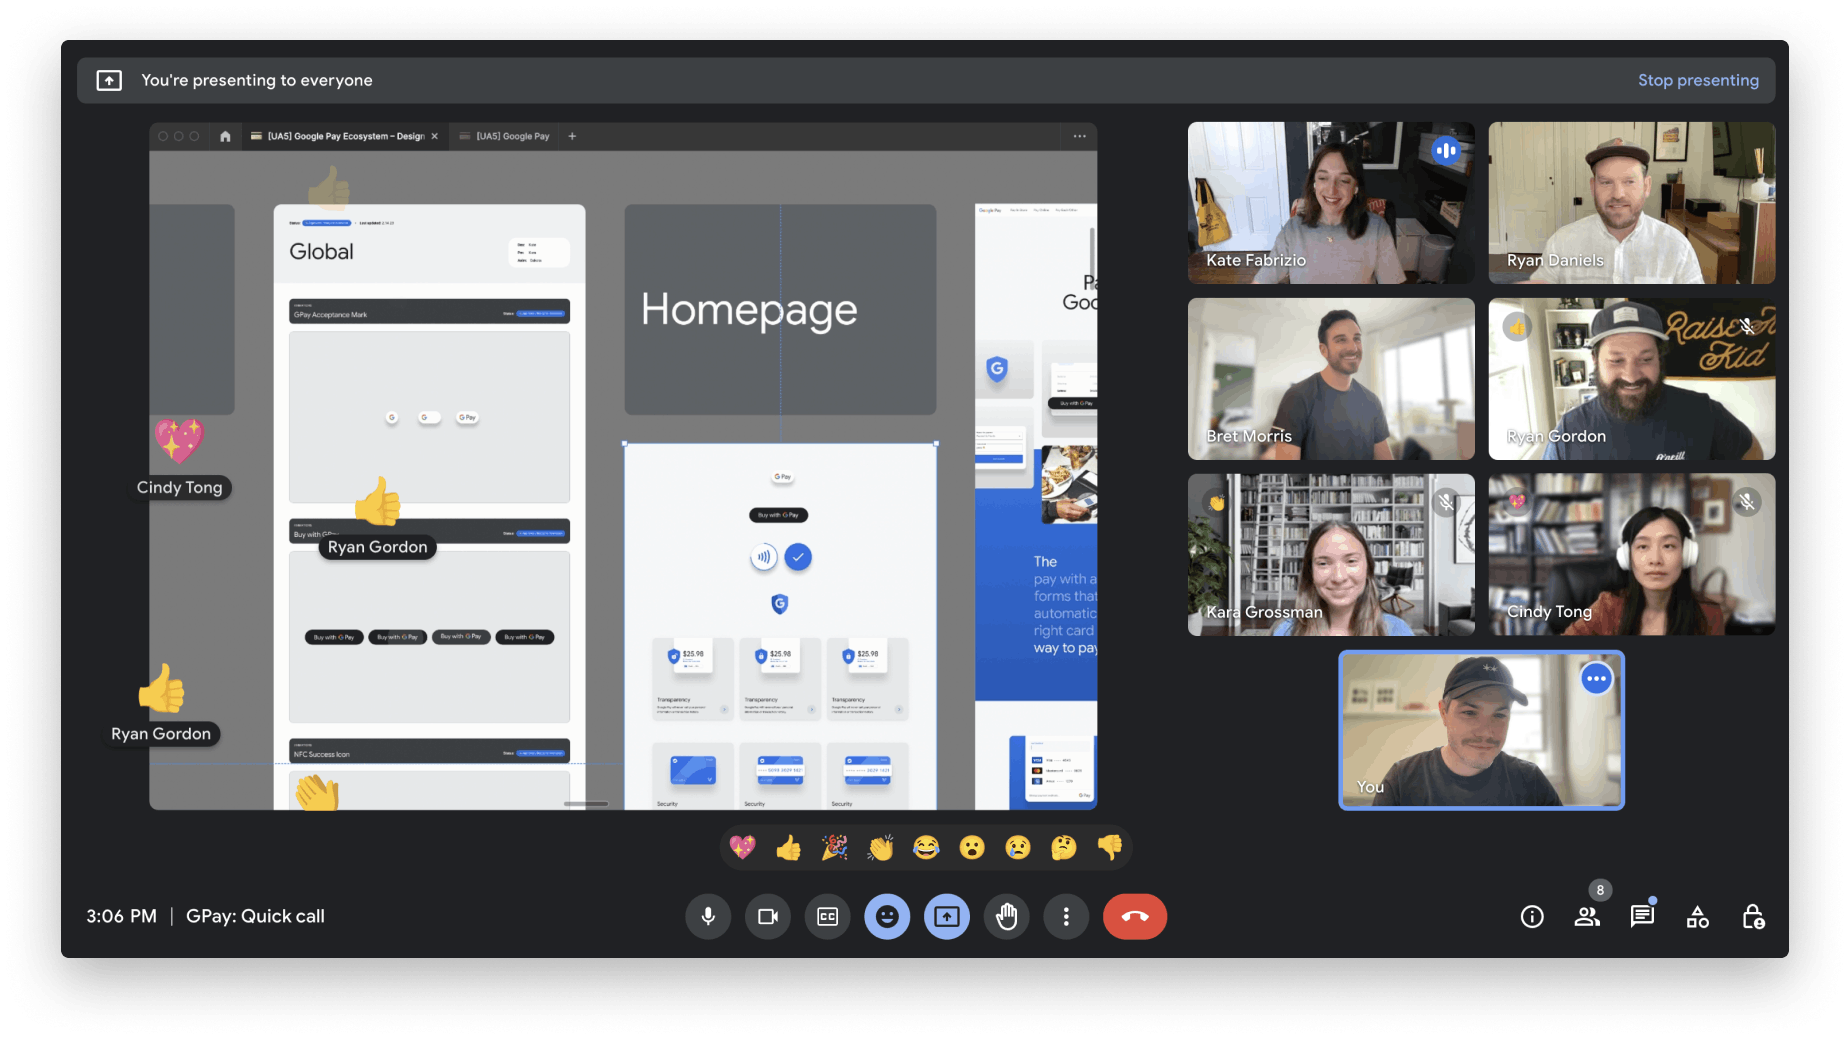 A Google Video call with designs being shared